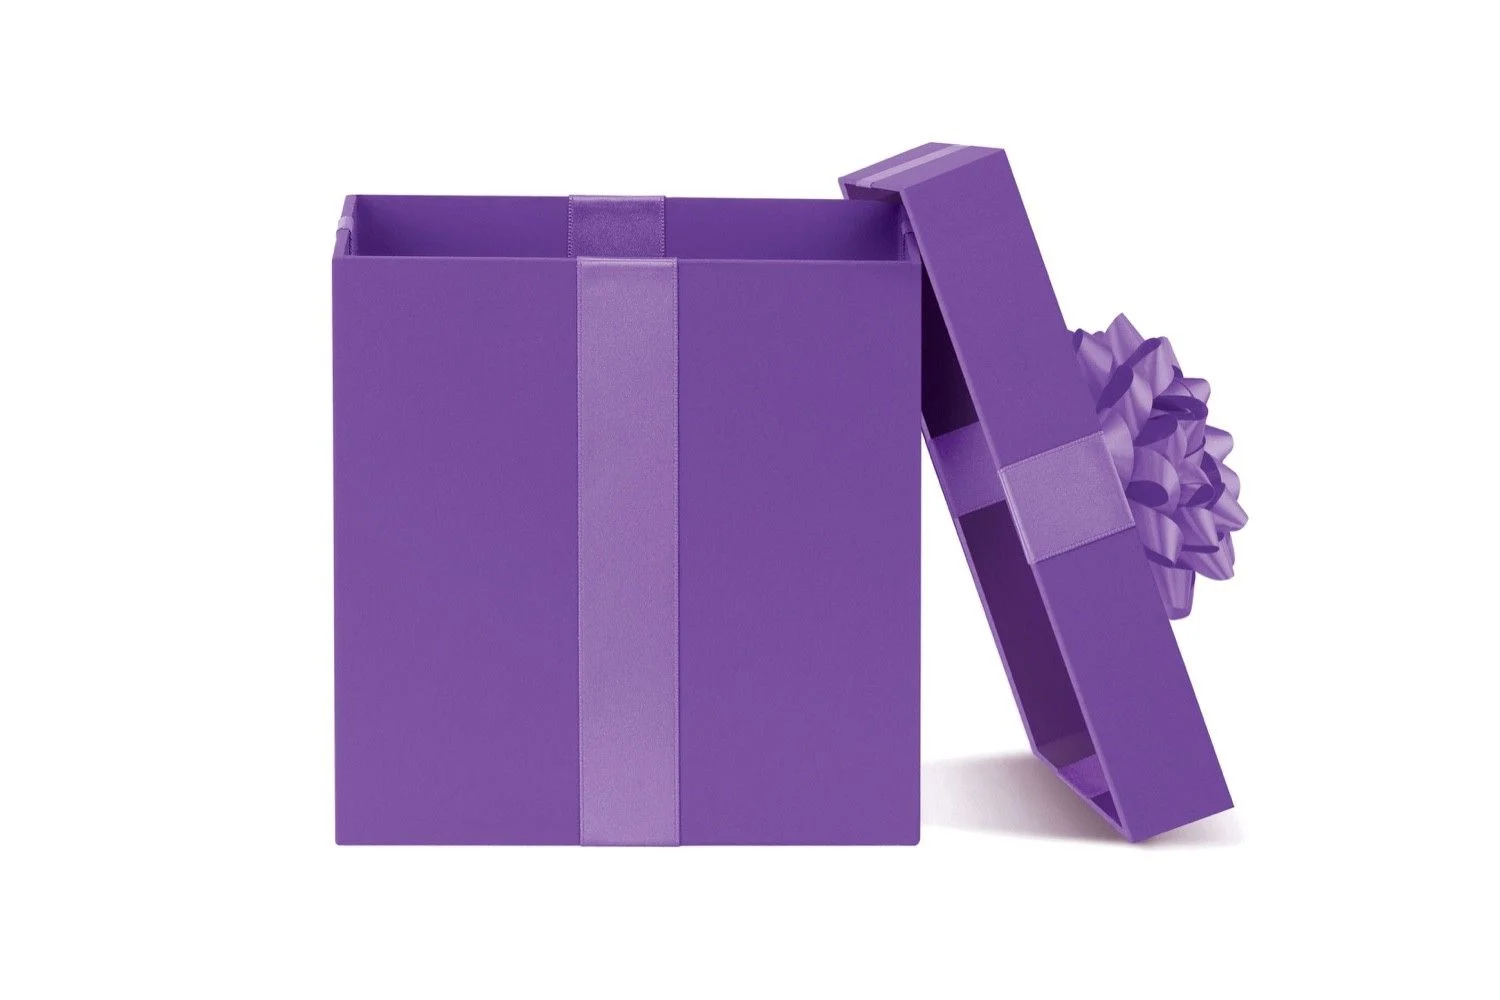 An image showing a purple opened gift box.